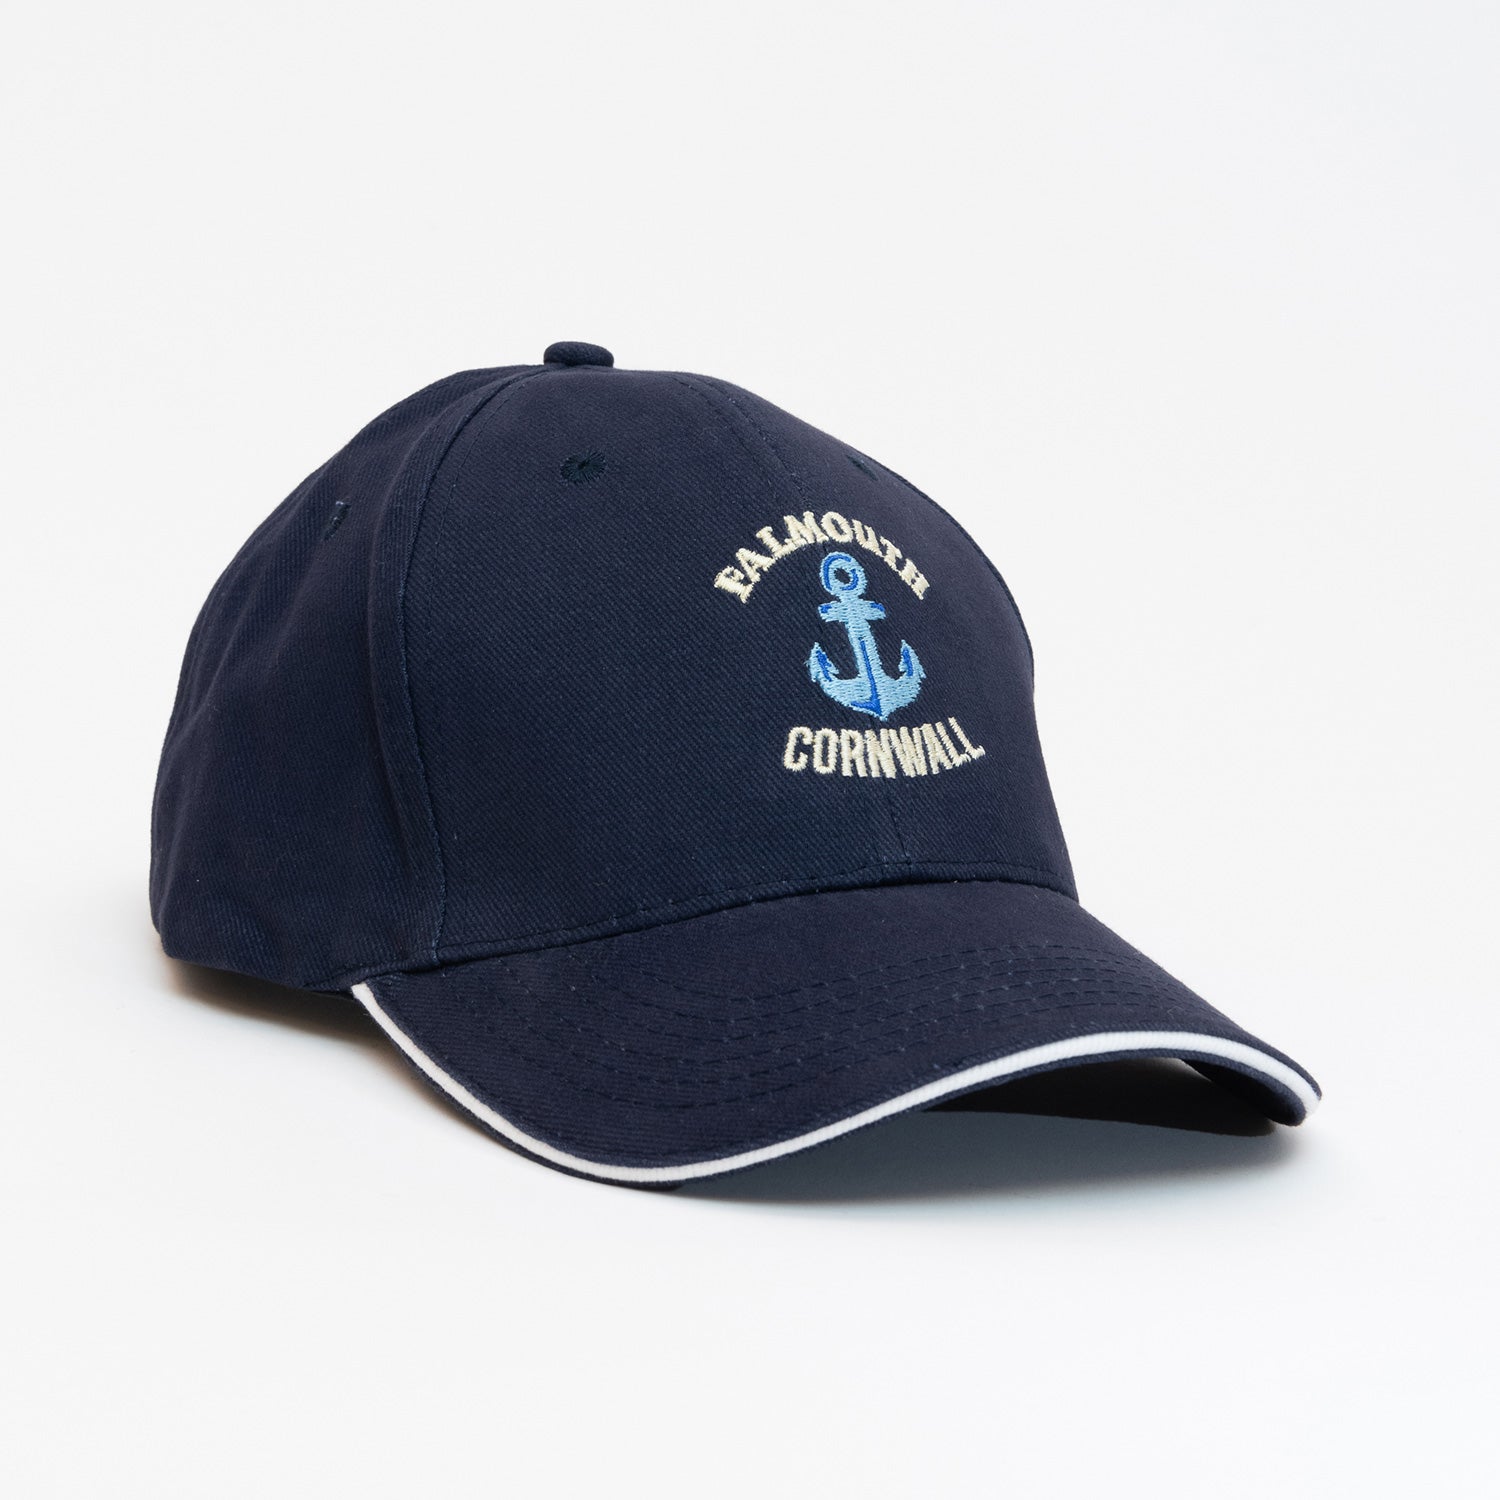 Navy cap with Falmouth, Cornwall embroidered in white around an embroidered blue anchor